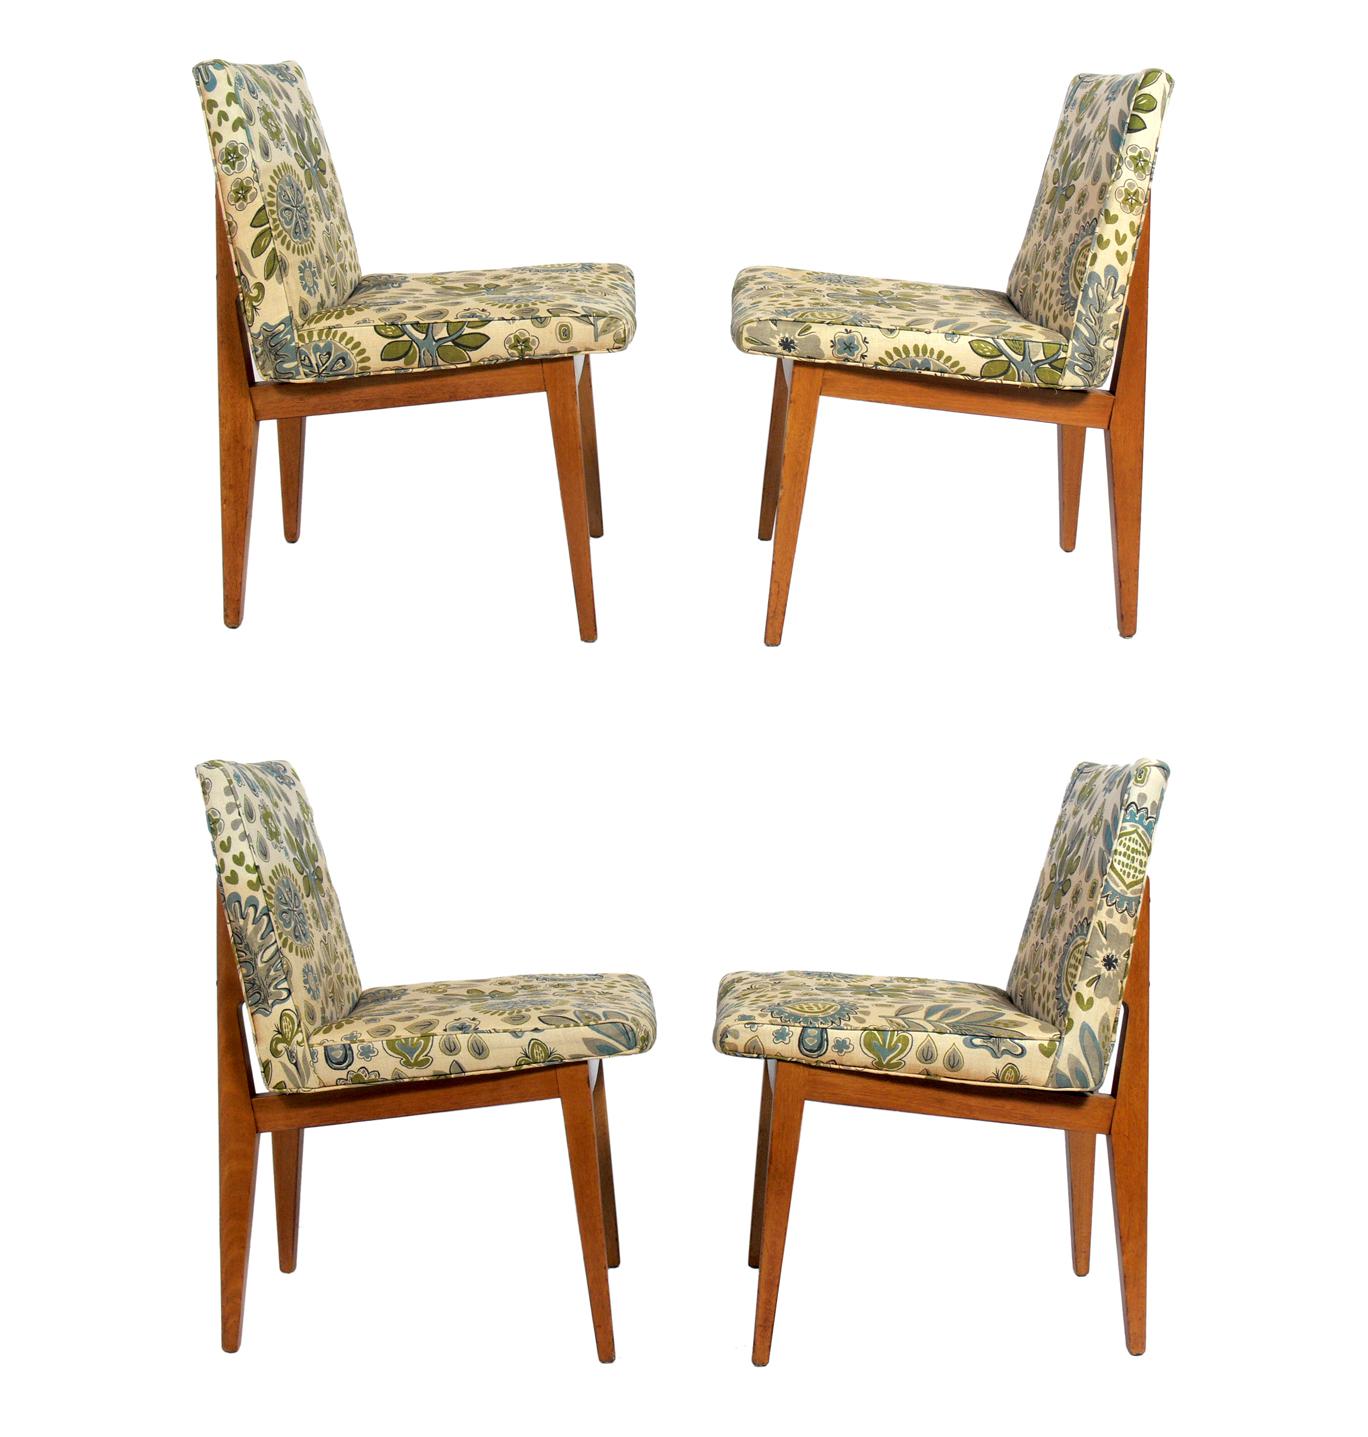 Set of Four Bracket Back Dining Chairs by Dunbar